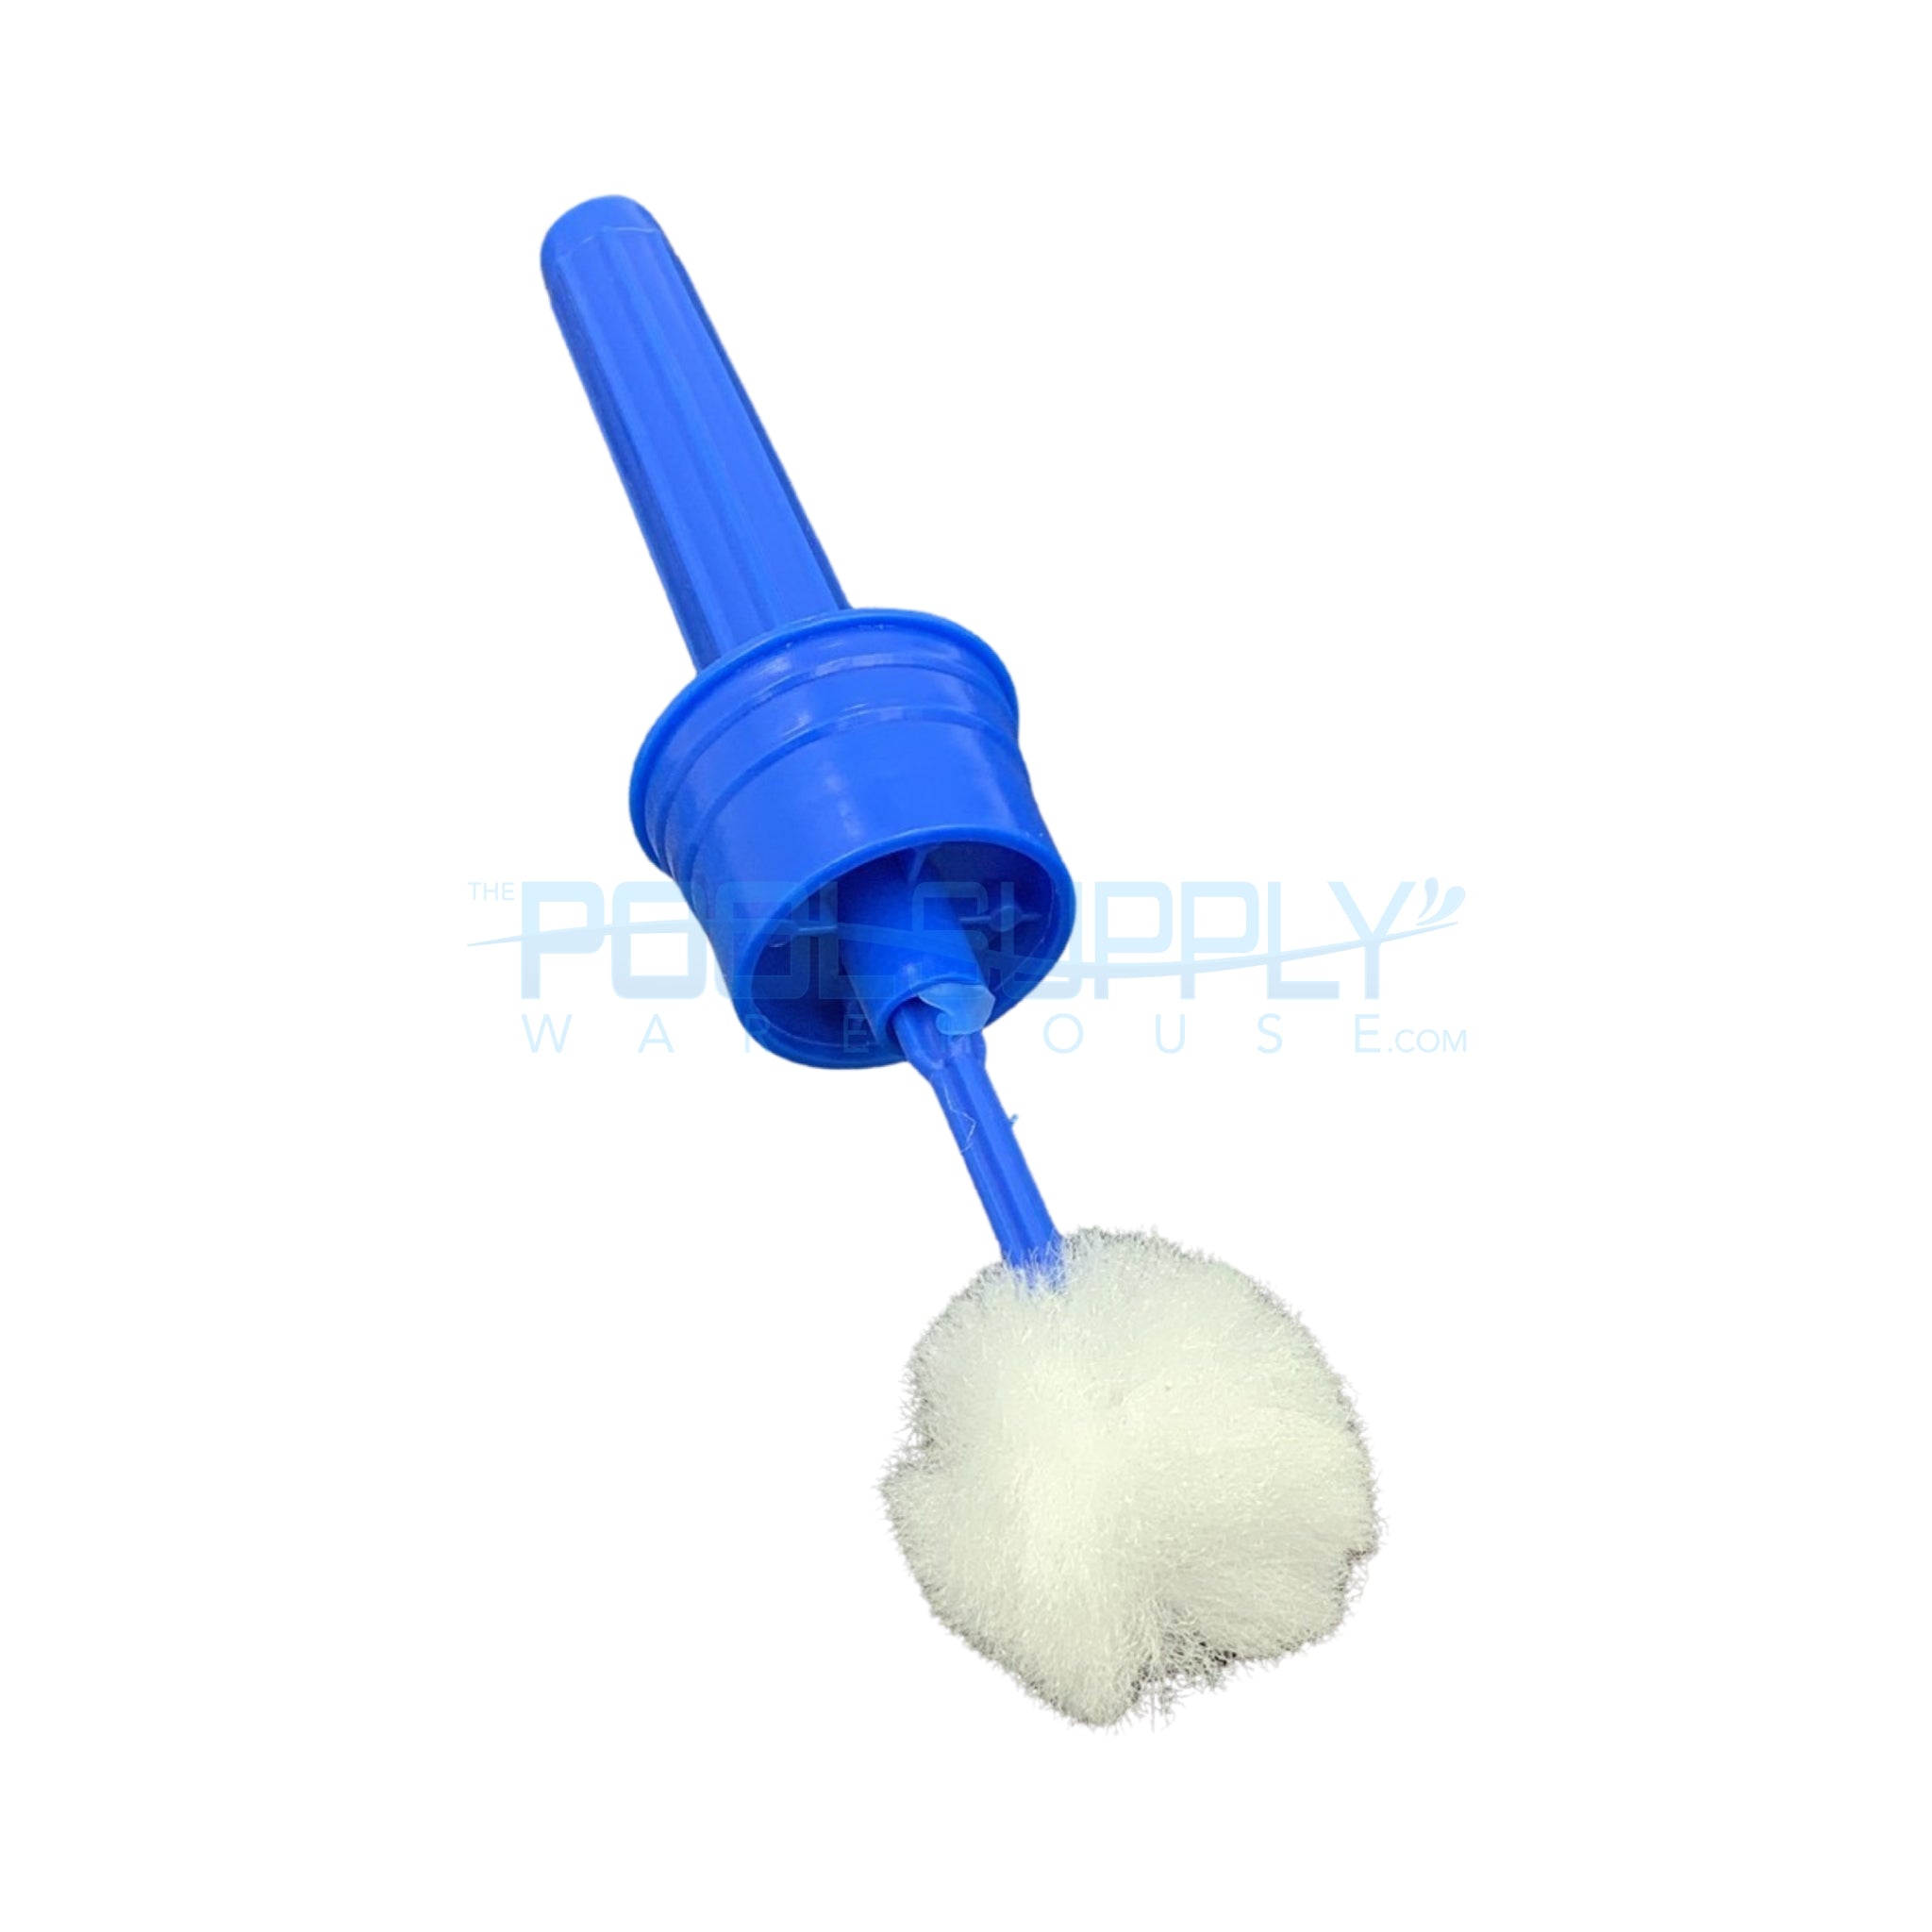 IPS Corporation Adjustable Can Mate Glue Dauber  - 10833 - The Pool Supply Warehouse